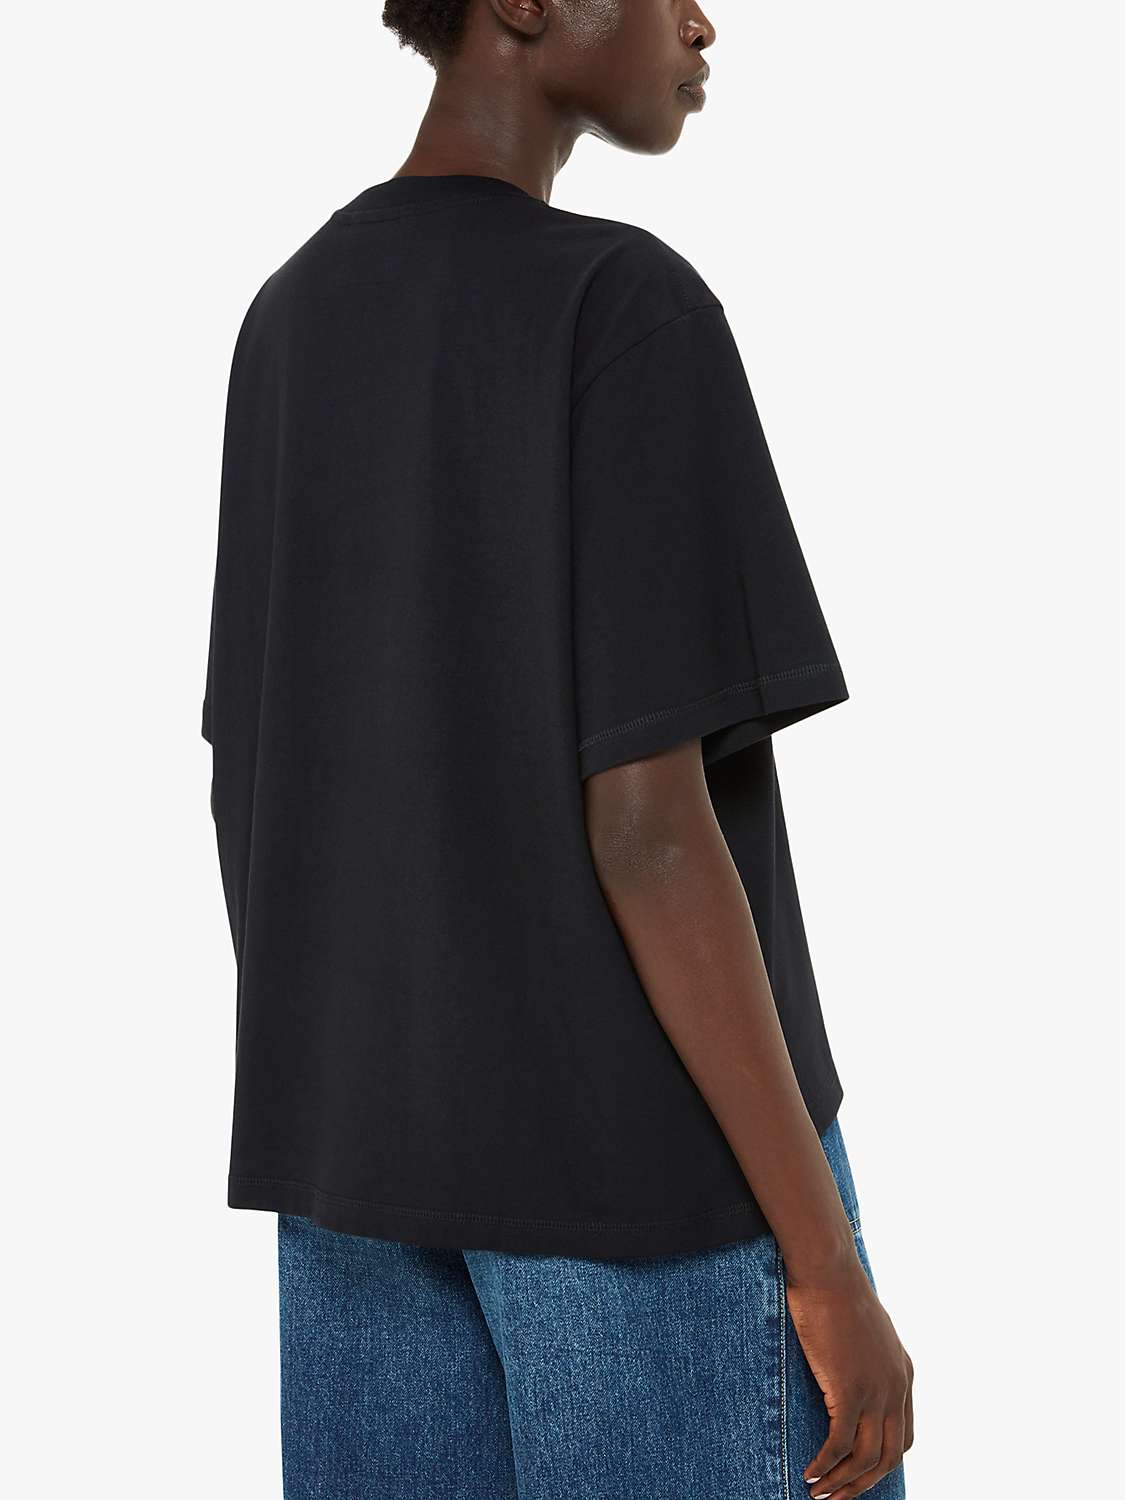 Buy Whistles Relaxed Cotton T-Shirt, Black Online at johnlewis.com